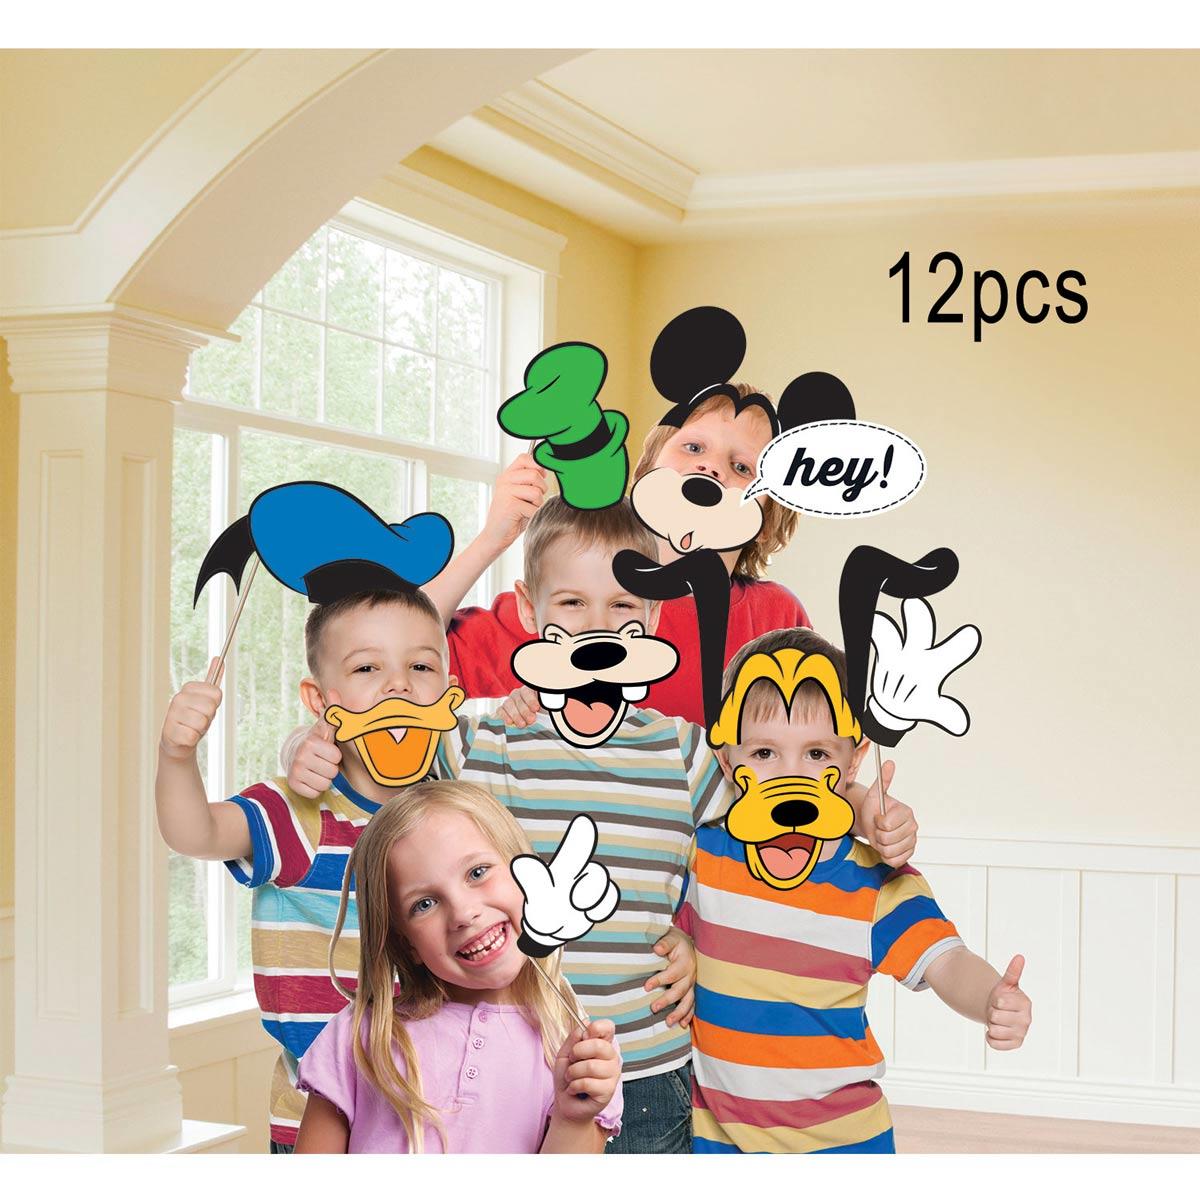 Mickey Mouse 12pc Photo Booth Kit by Amscan 9903185 available here at Karnival Costumes online party shop